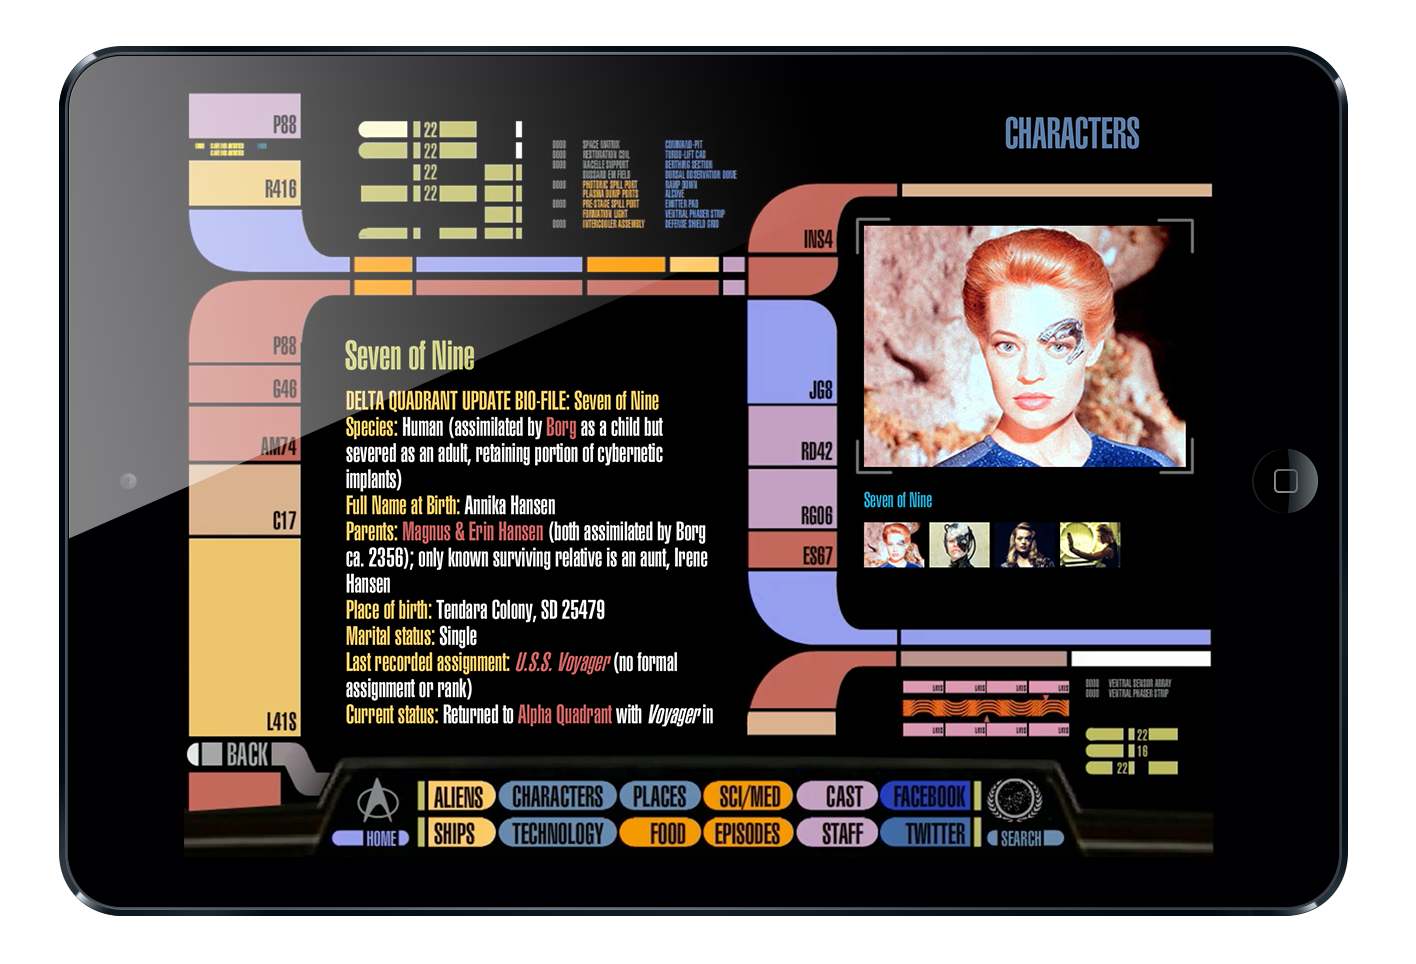 Star Trek Padd iPad App Created By Arctouch Developers